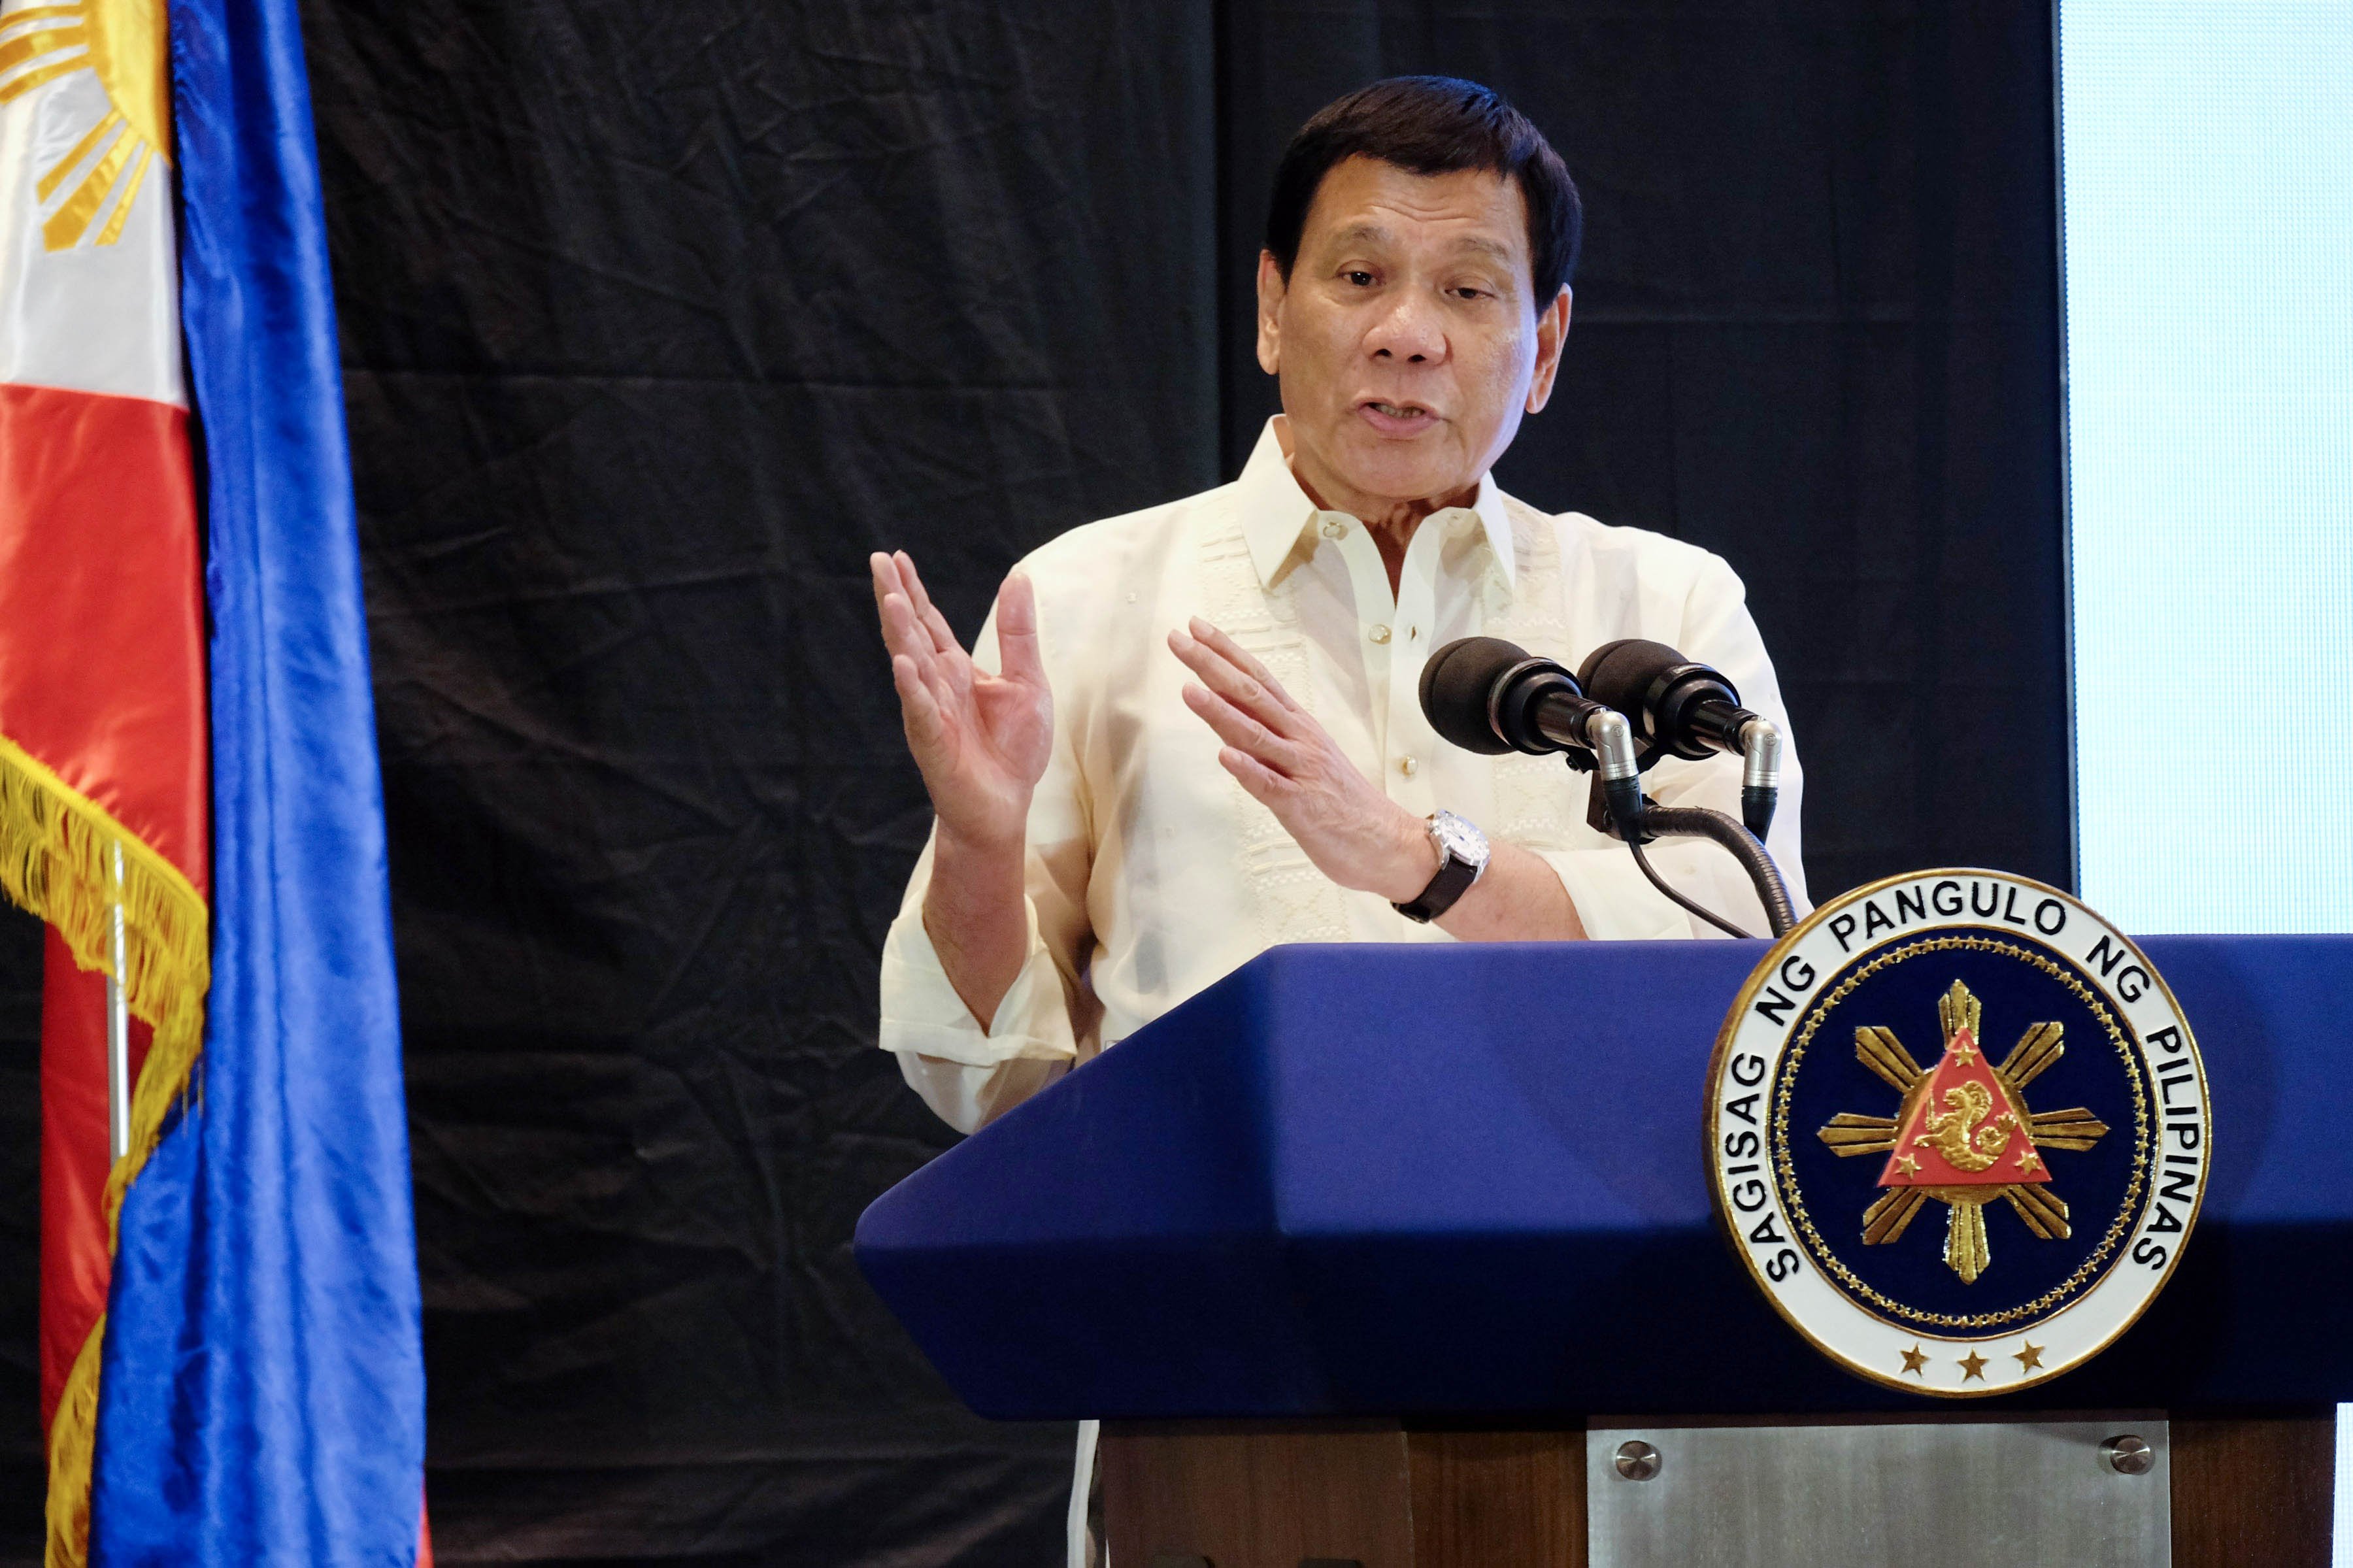 No intention to wage war vs any country, says Pres. Duterte